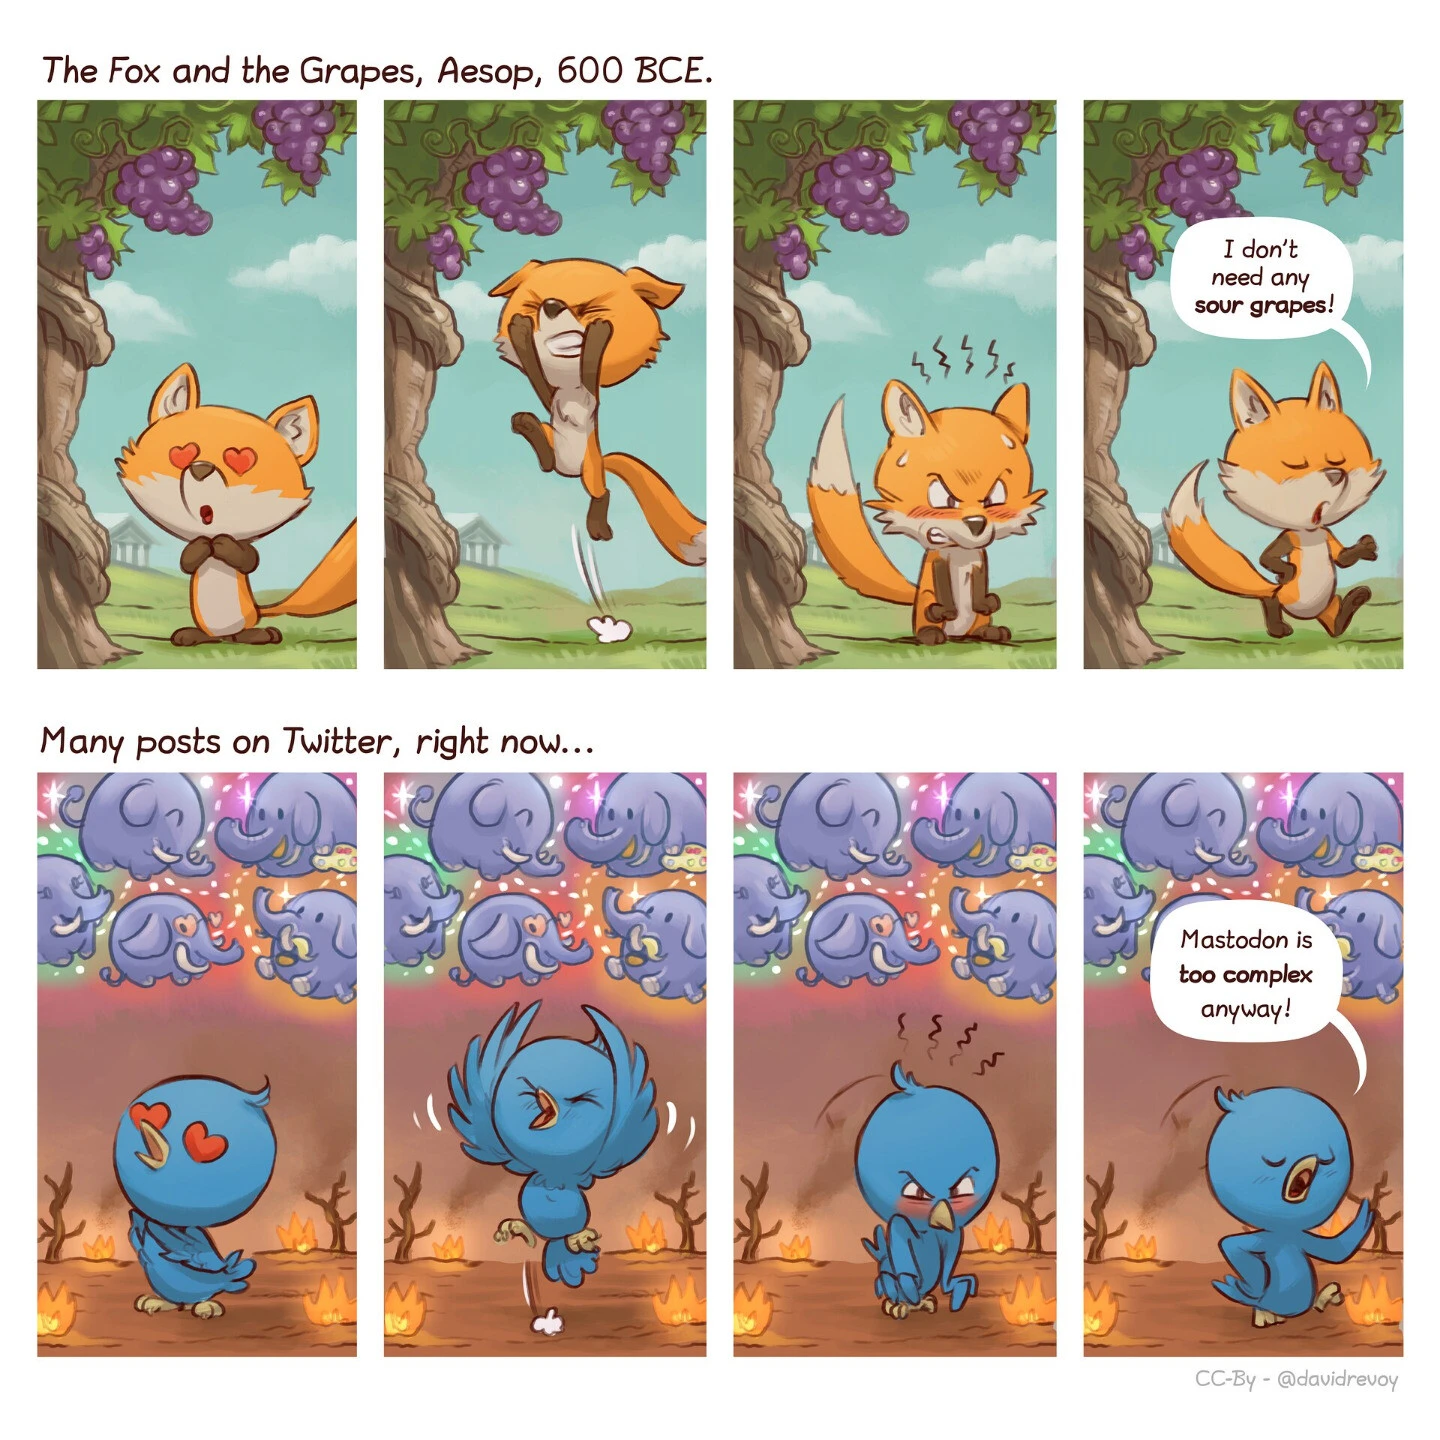 Two colored comic strips with four panel. The one of the top says: The Fox and the Grapes, Aesop, 600BCE. and depict a fox falling in love with grapes hanging on a tall tree, unfortunately, can't catch them, get frustrated and then run away while restoring self-confidence saying I don't need any sour grapes. The comic of the bottom in parallel says Many posts on Twitter, right now... and depicts the same story with a blue bird falling in love with a network of Mastodon, can't reach it, gets frustrated, and ends with the bird running away saying Mastodon is too complex anyway!